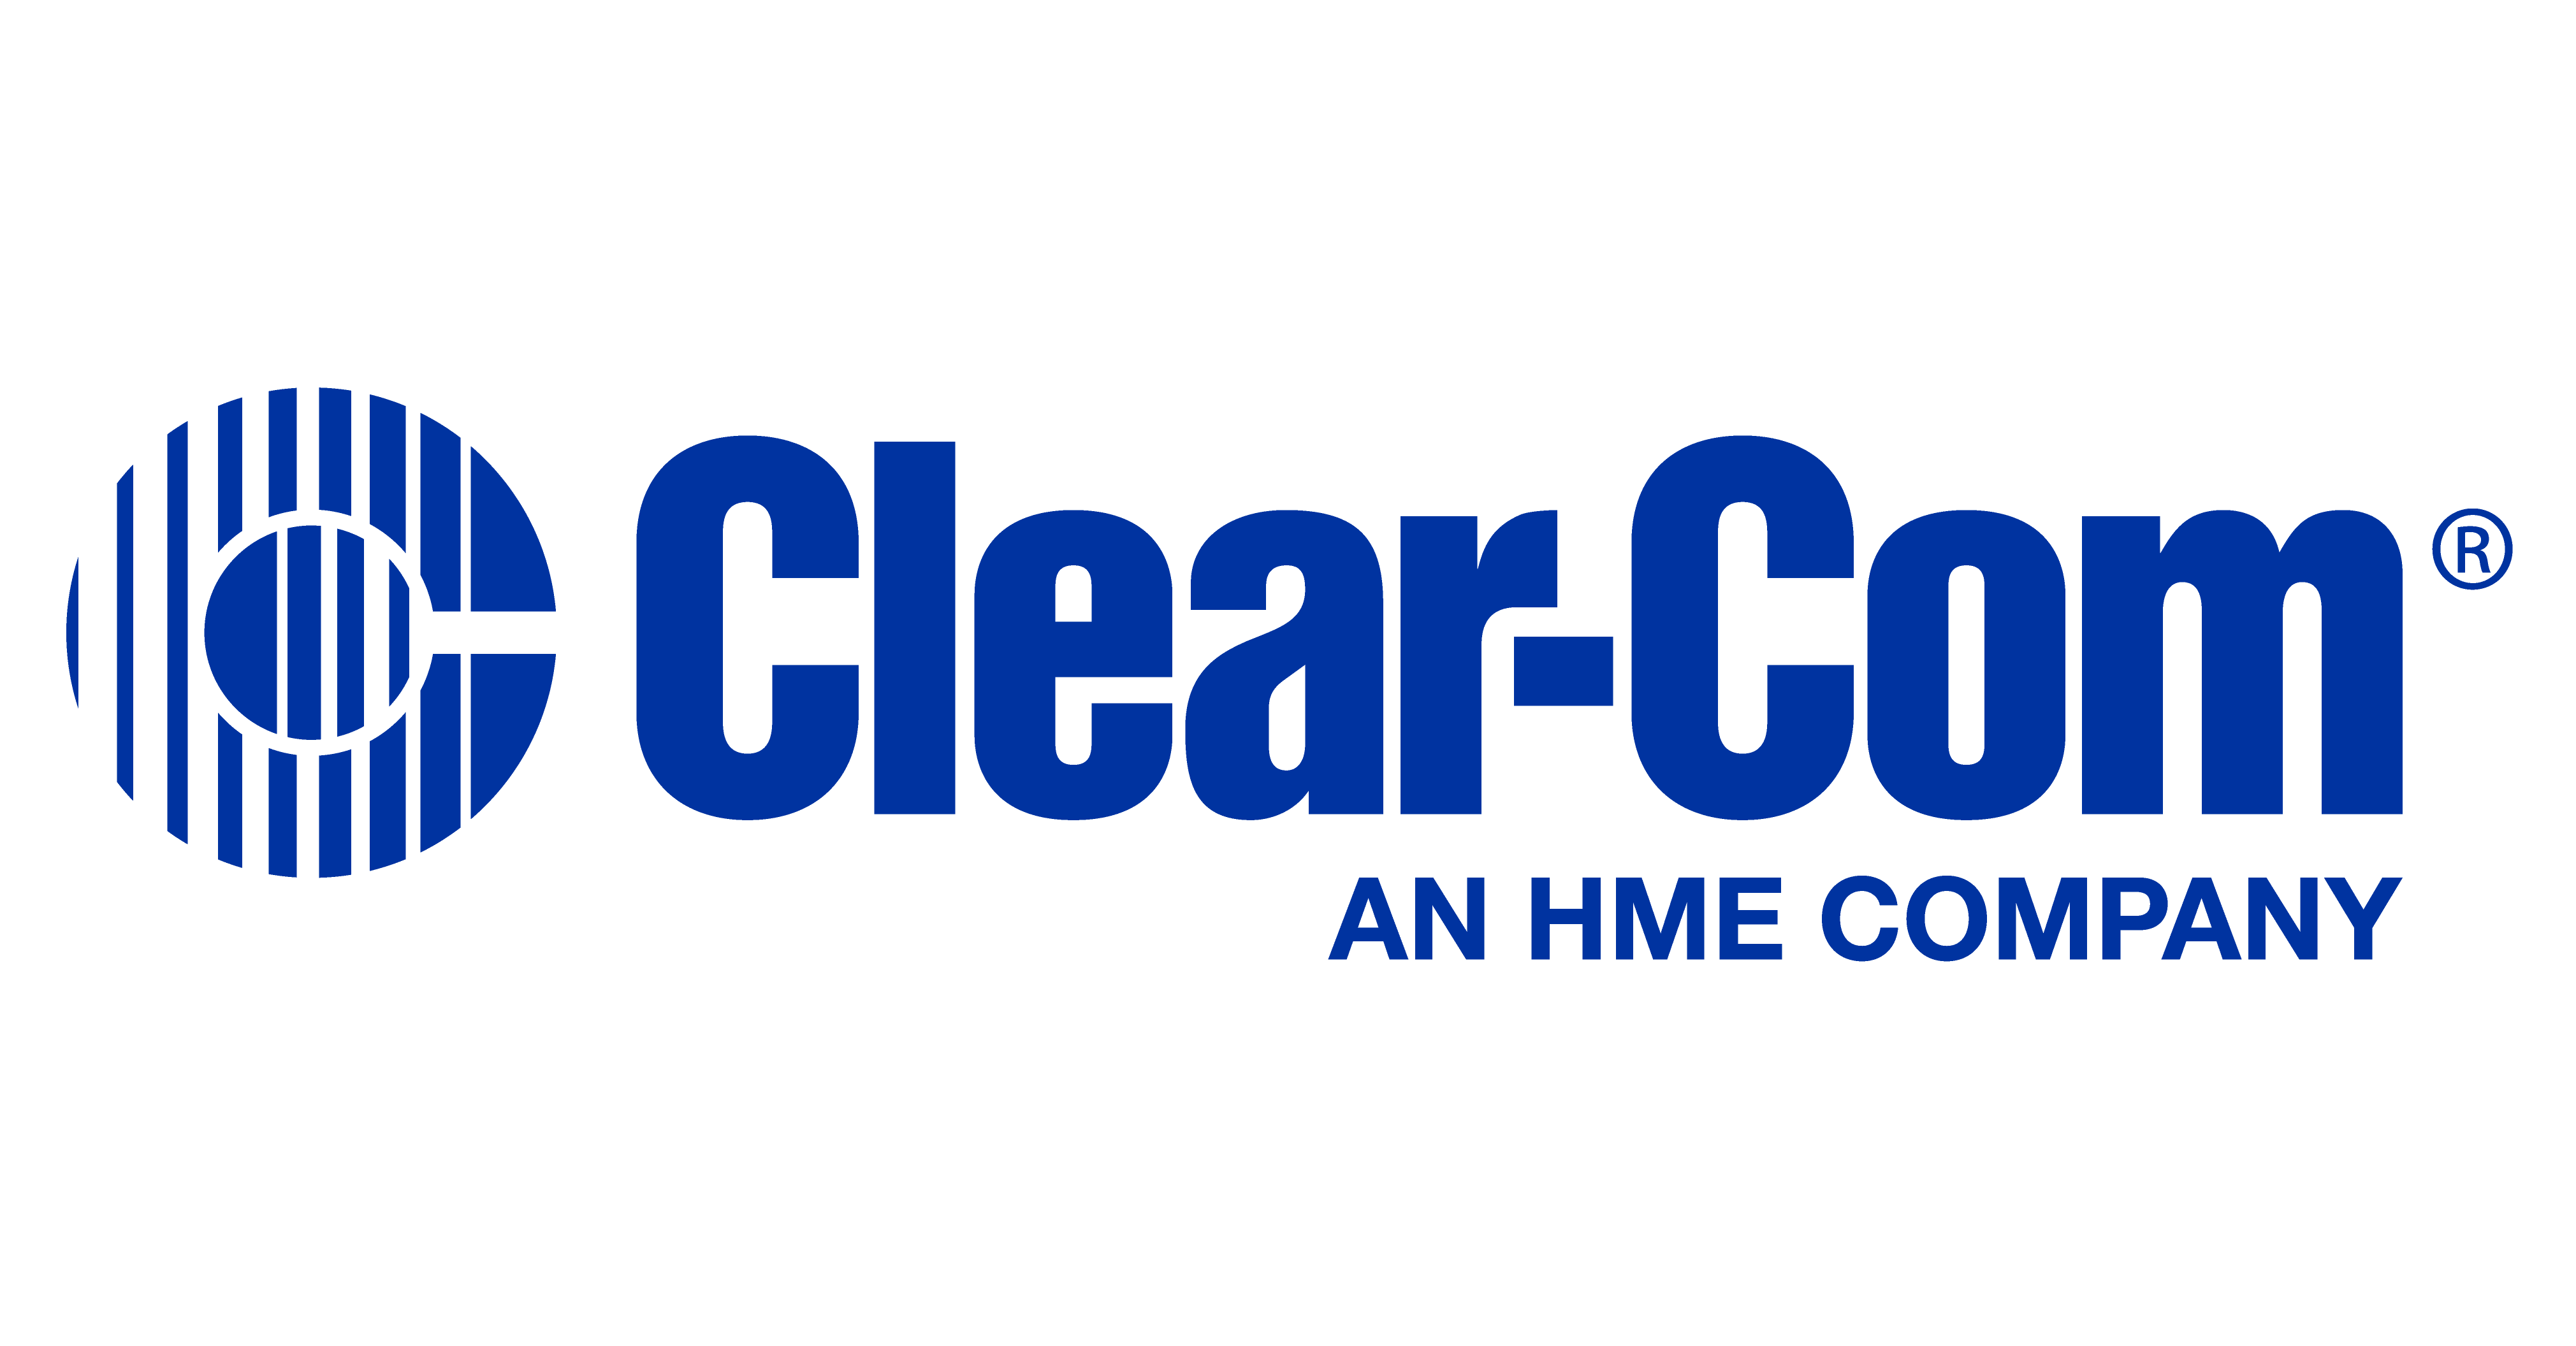 CLEARCOM. Clear логотип. Служебная связь CLEARCOM. Clear.com связь. Clear connection